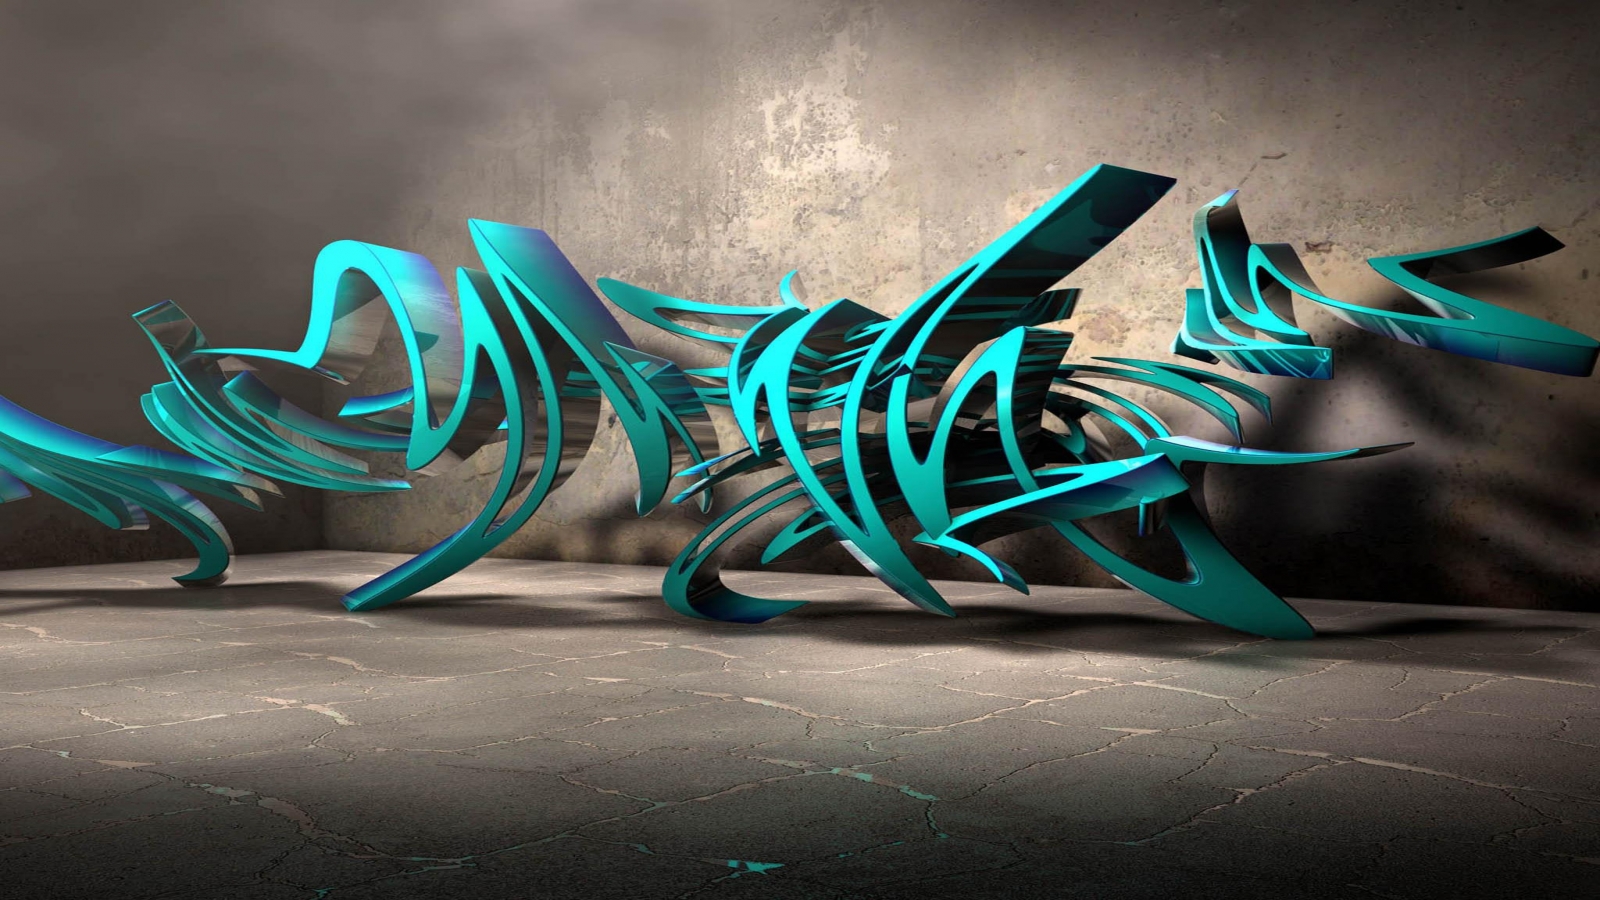 3D Graffiti Wallpapers Wallpaper Area Image source from this